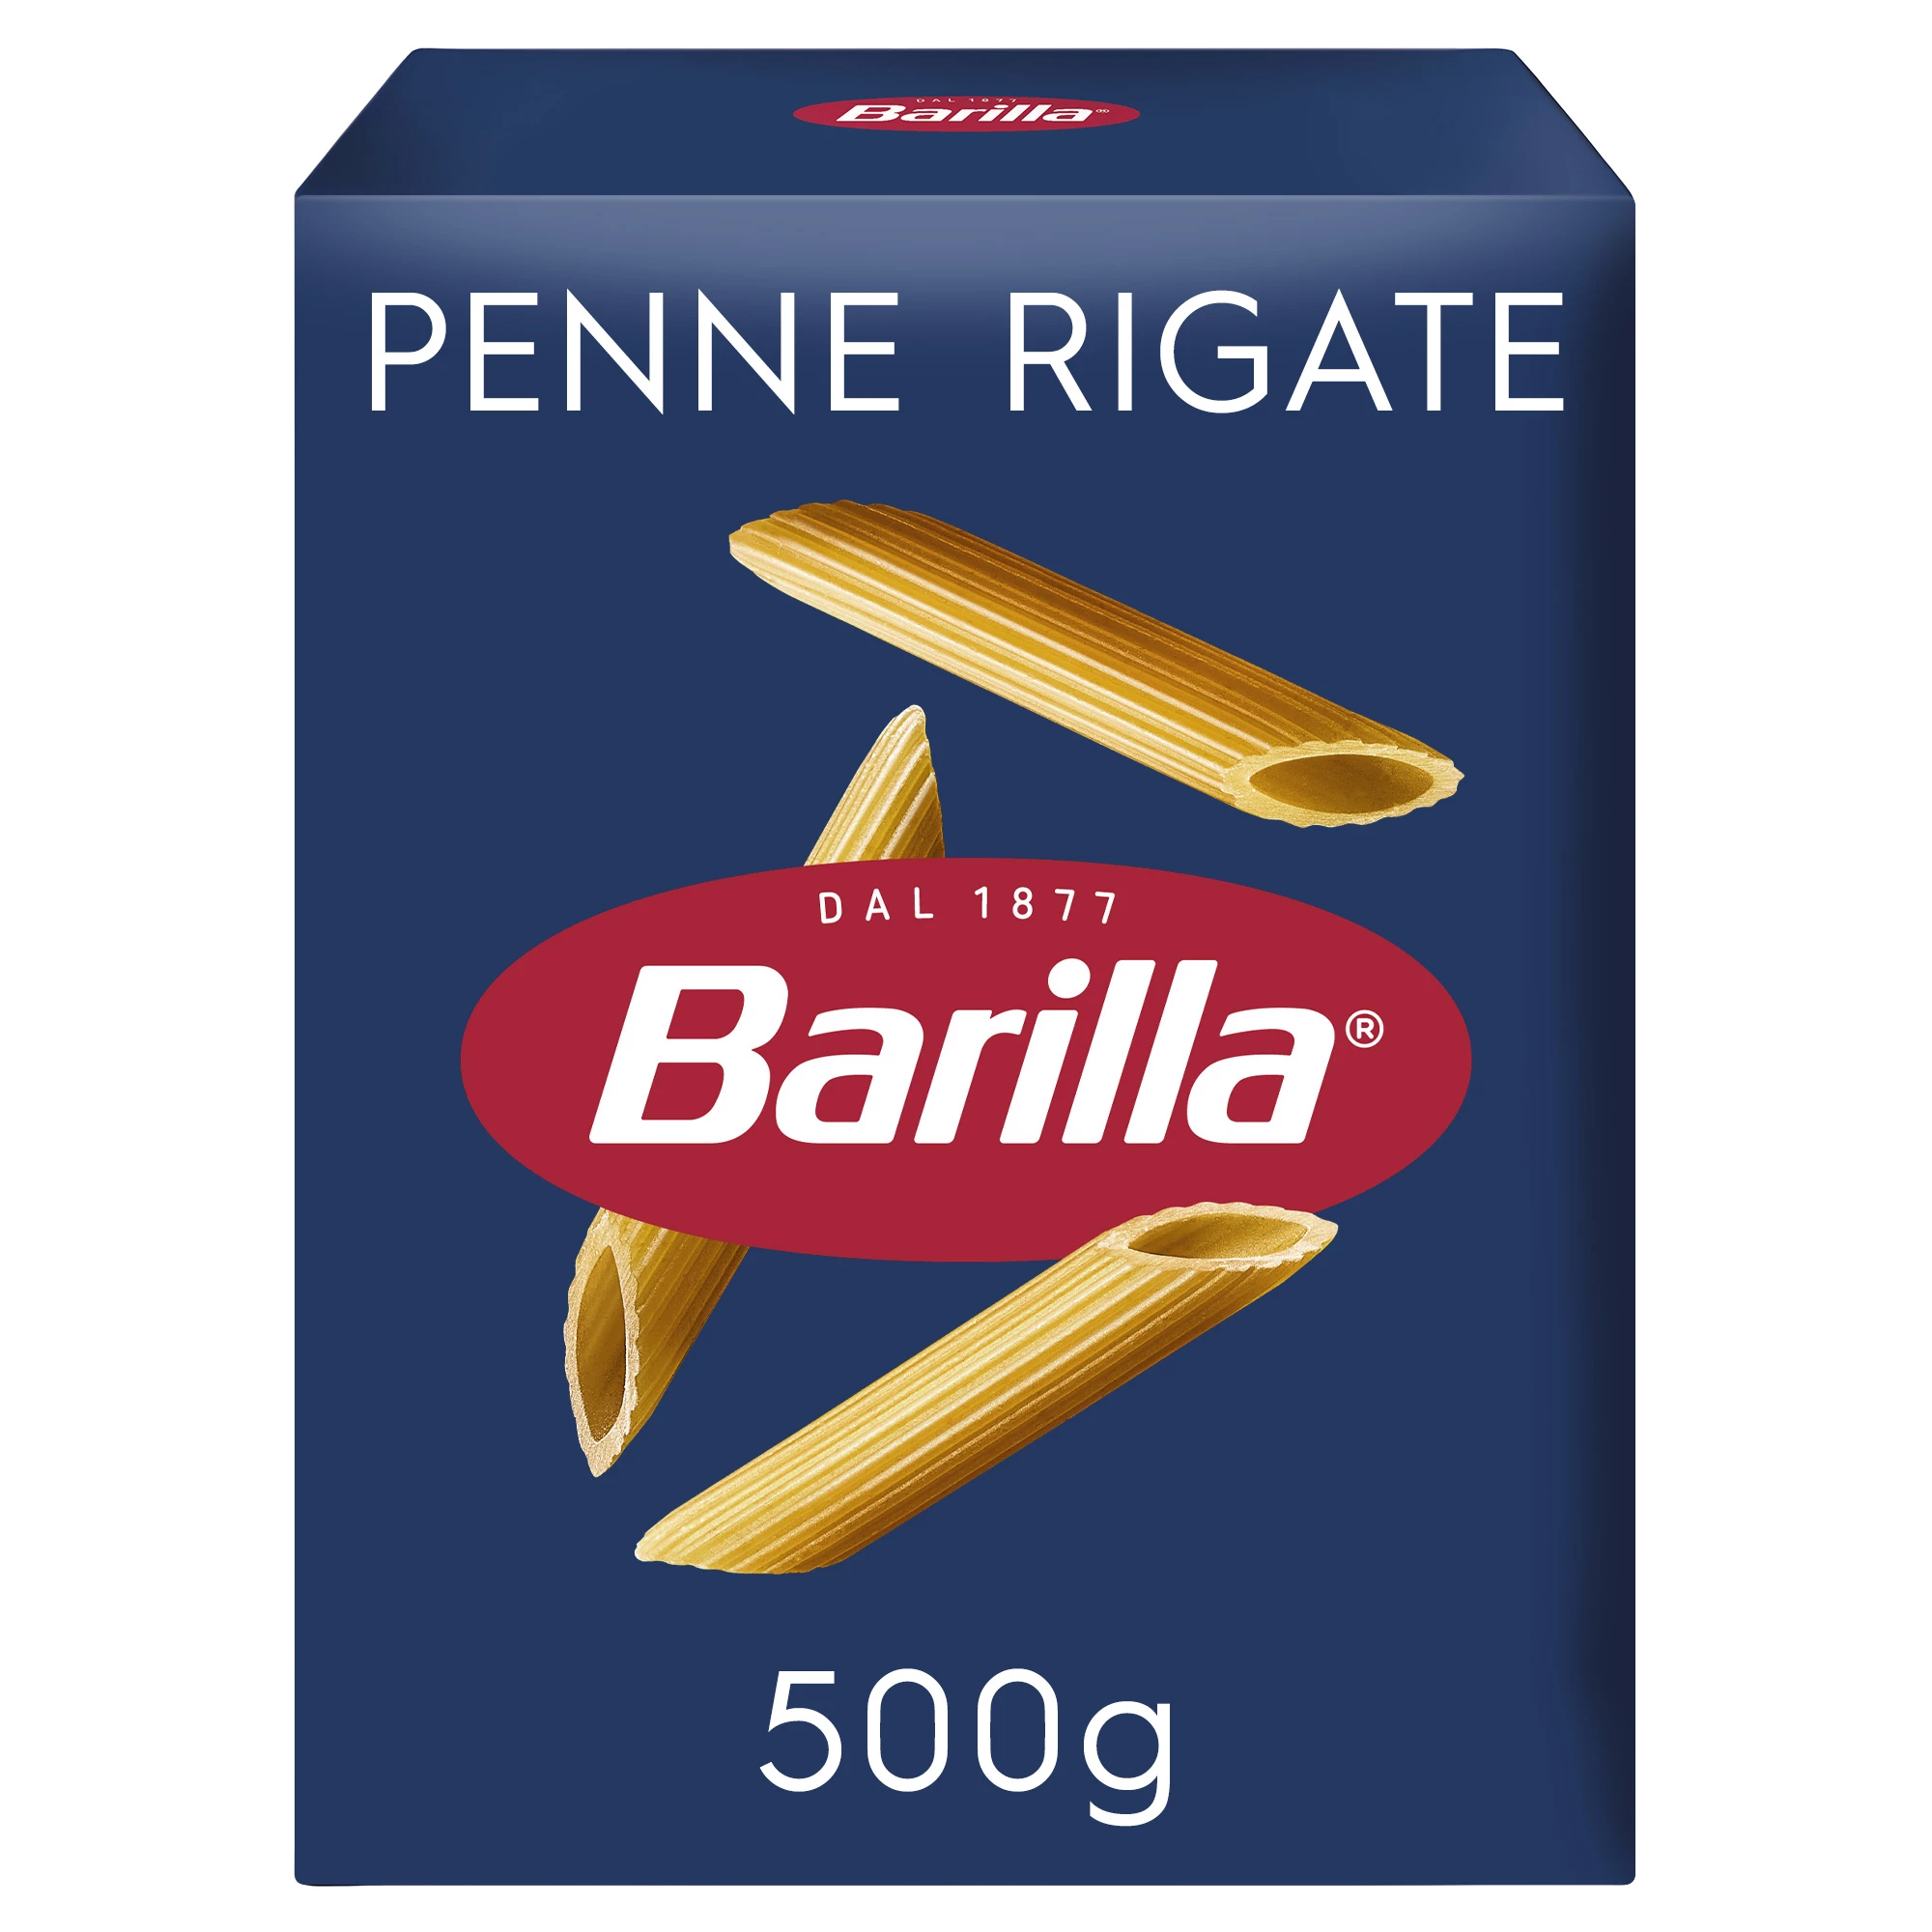 Mì ống Penne Rigate 500g - BARILLA